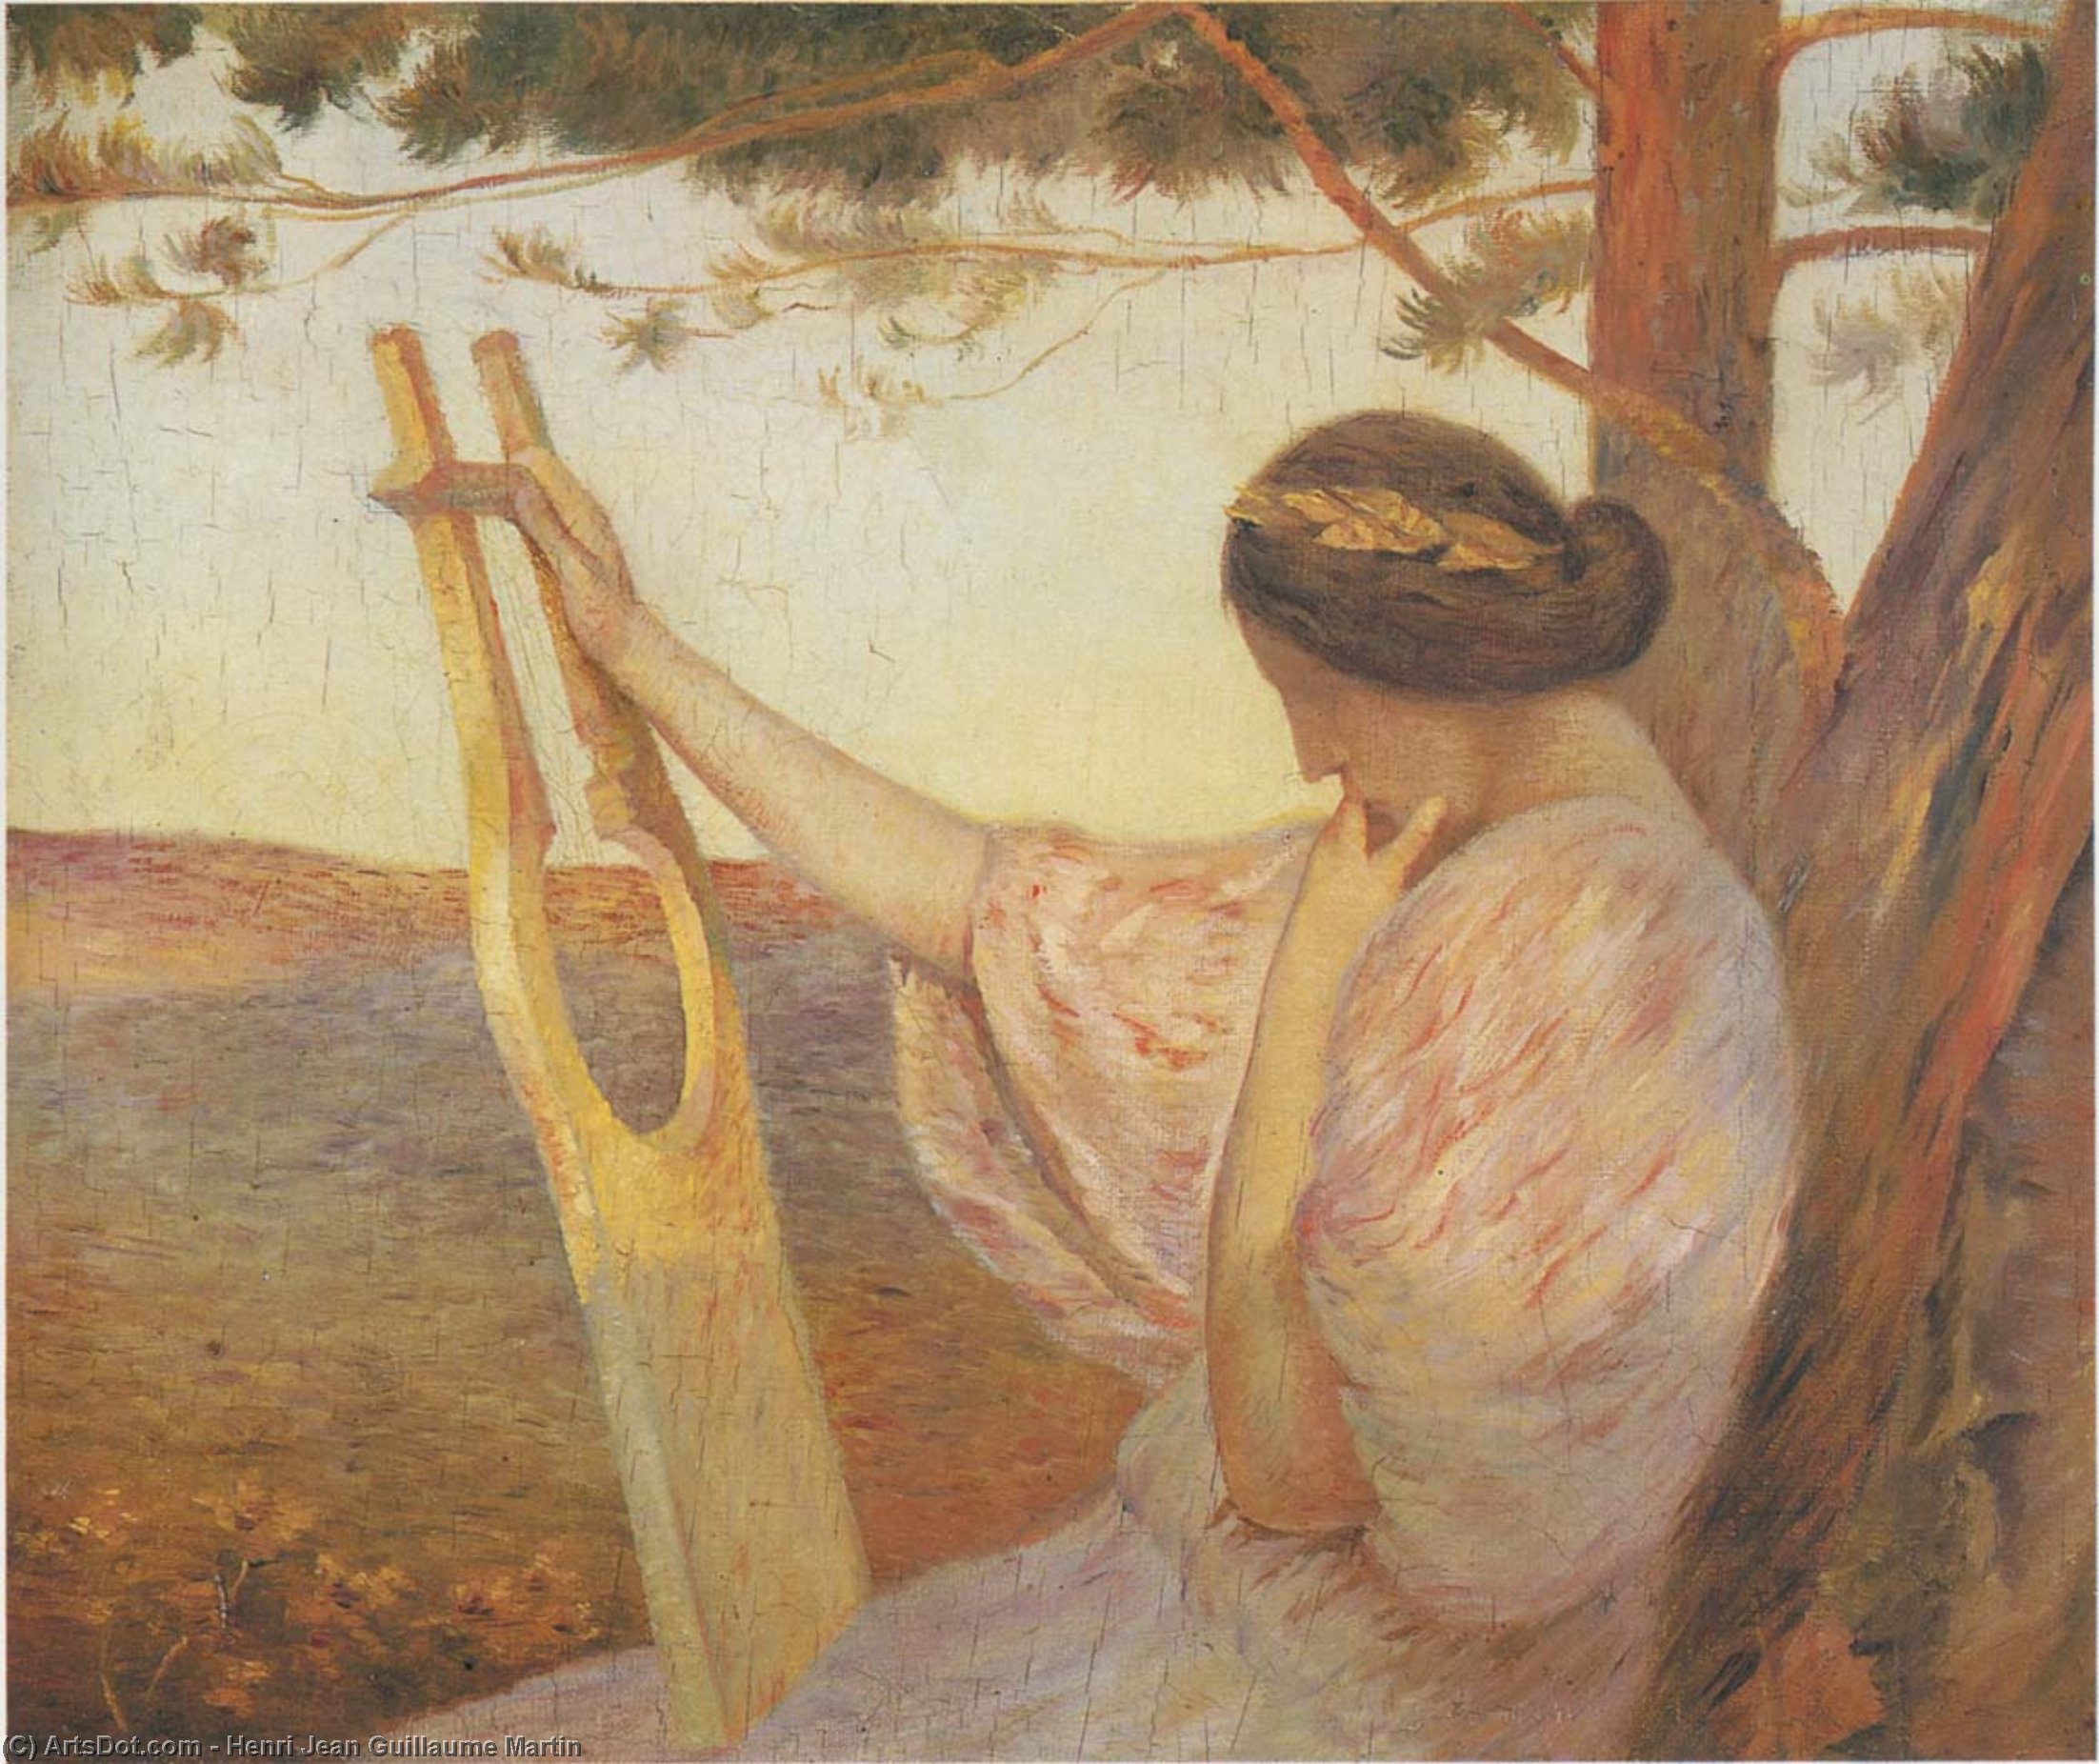 Order Artwork Replica Lady with Lyre by Pine Trees, 1890 by Henri Jean Guillaume Martin (1860-1860, France) | ArtsDot.com